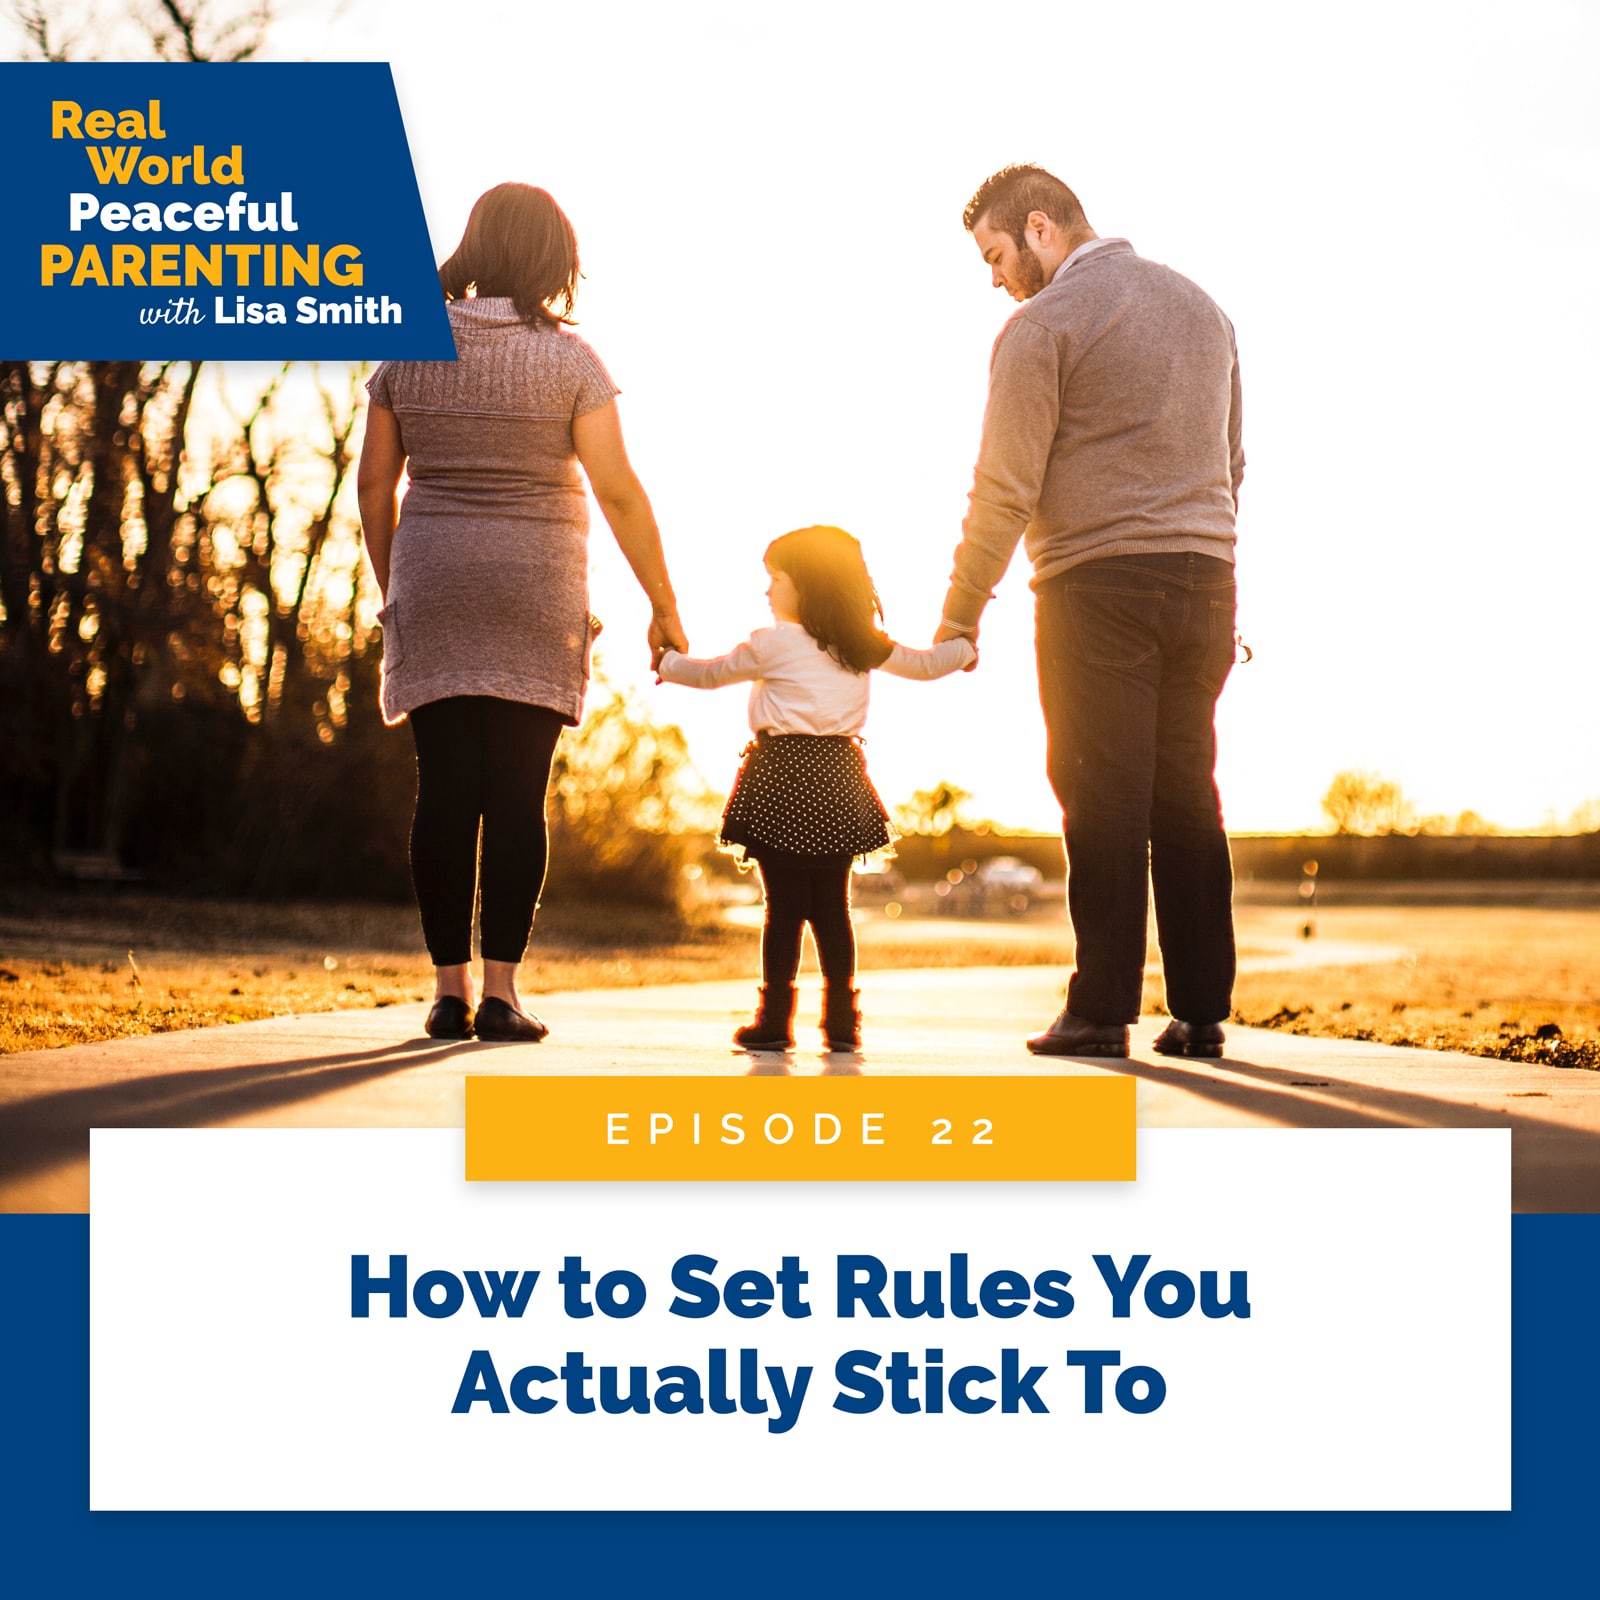 Real World Peaceful Parenting with Lisa Smith | How to Set Rules You Actually Stick To